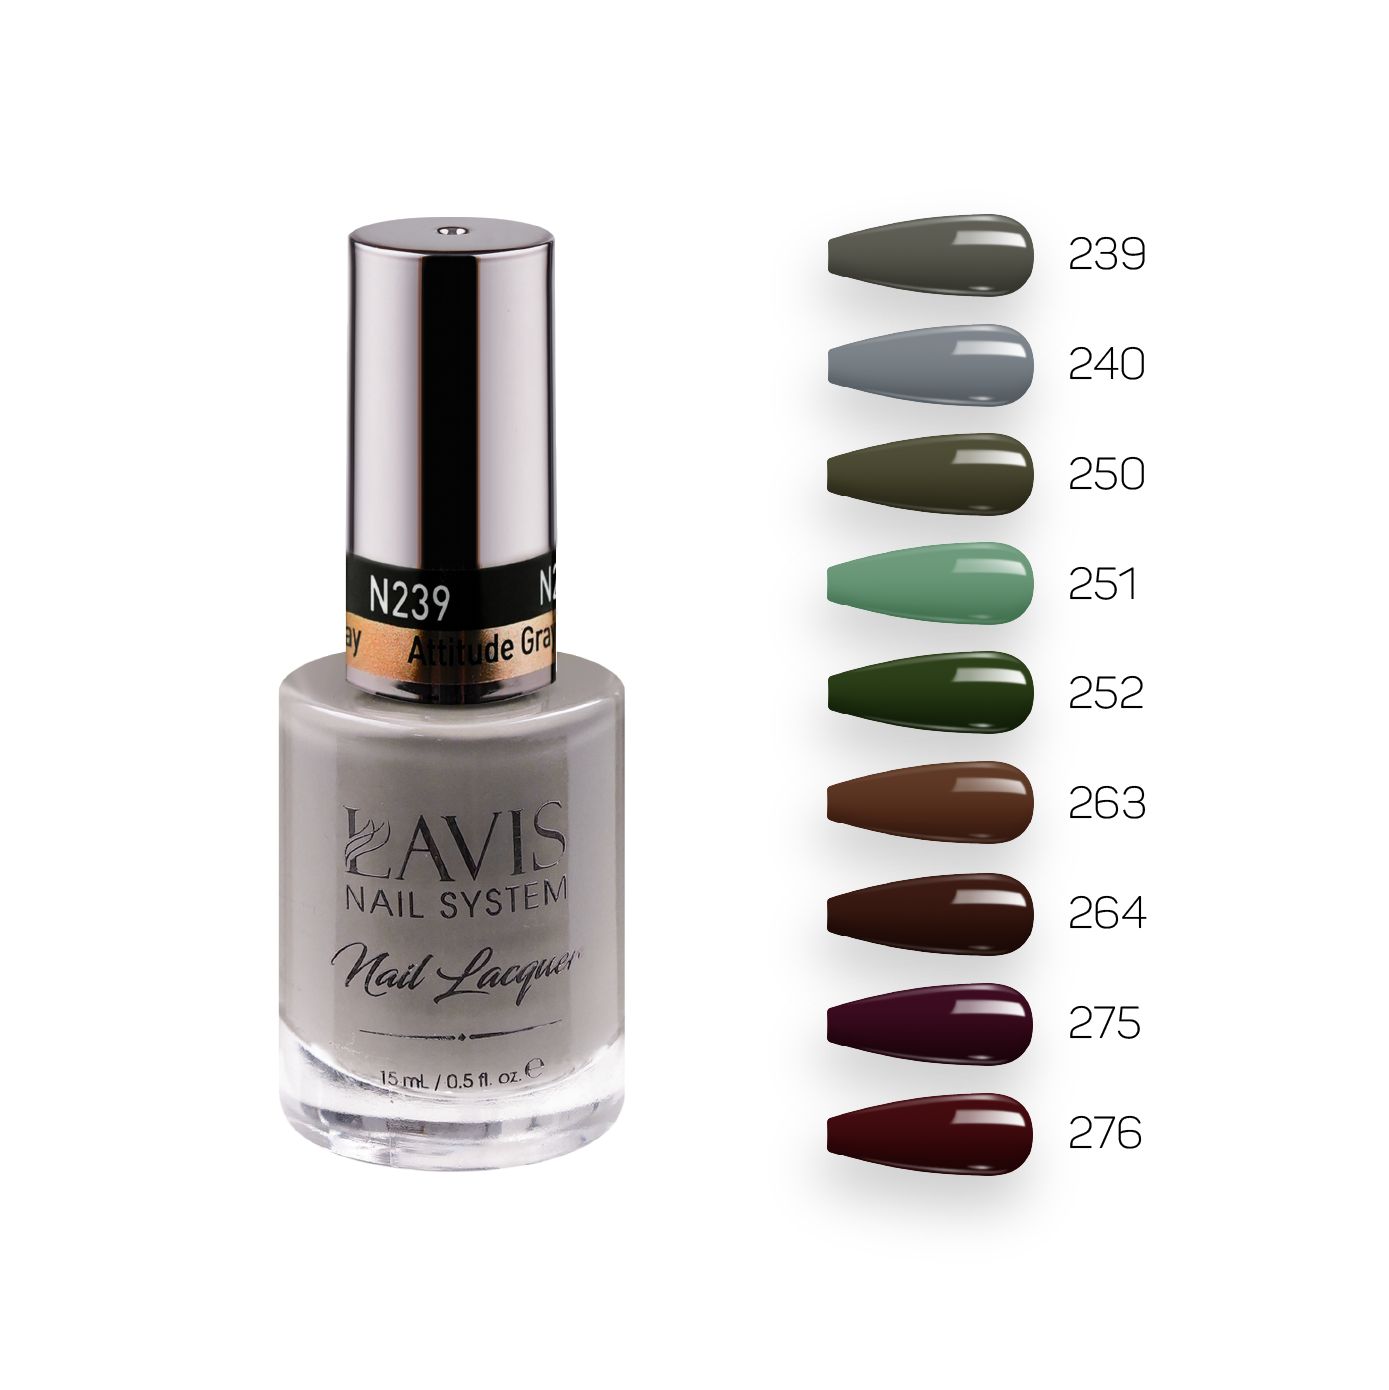 Lavis Healthy Nail Lacquer Fall Winter Set N5 (9 colors) : 239, 240, 250, 251, 252, 263, 264, 275, 276